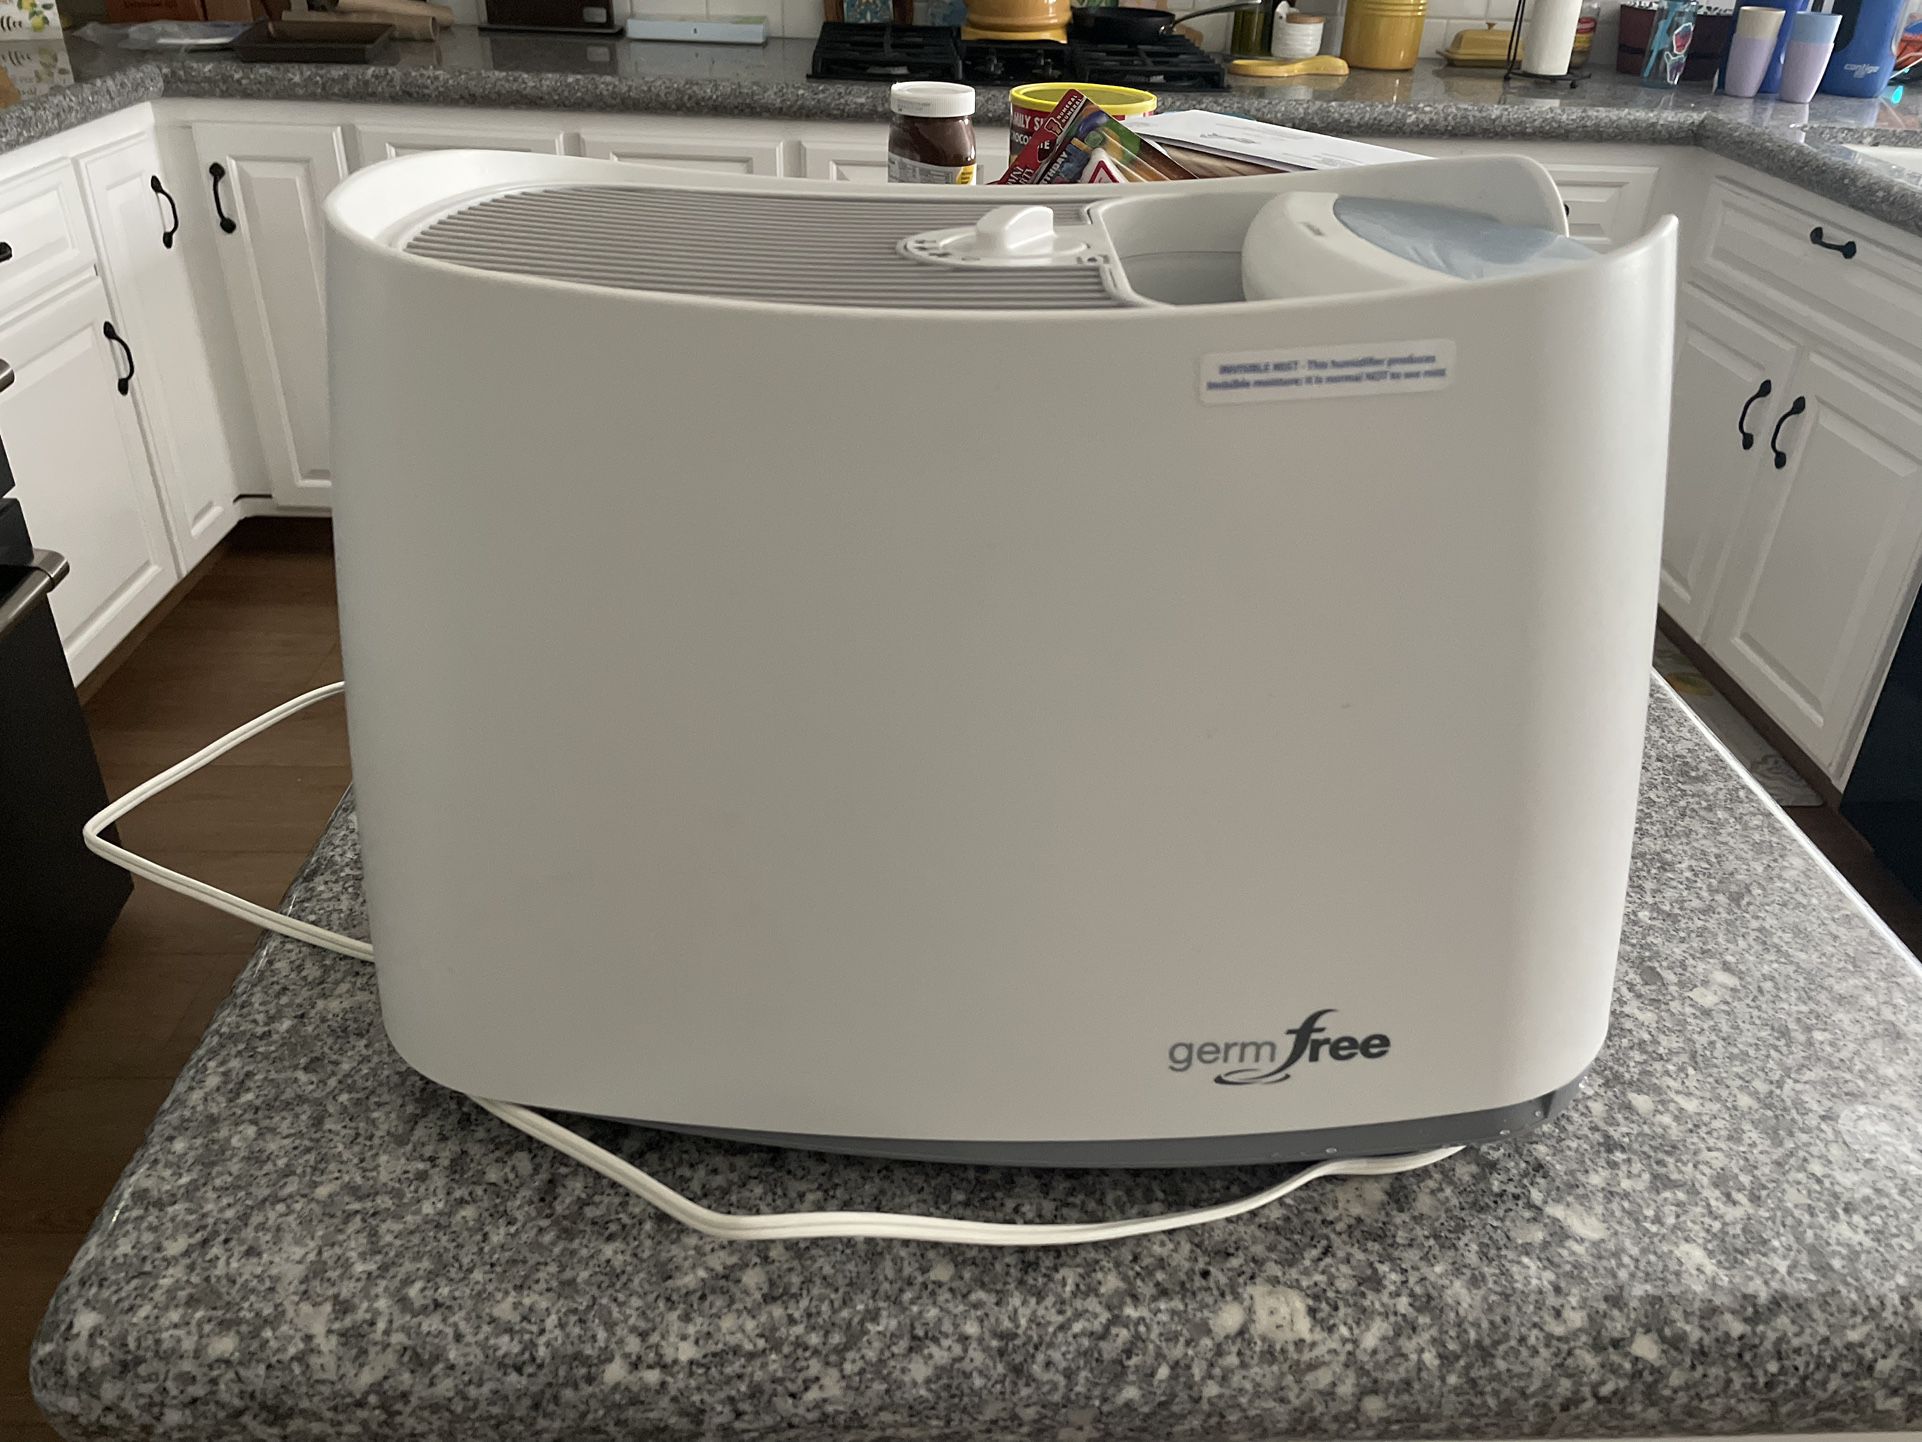 2 Honeywell germ free humidifiers, need a cleaning, $20 For Both. no filters